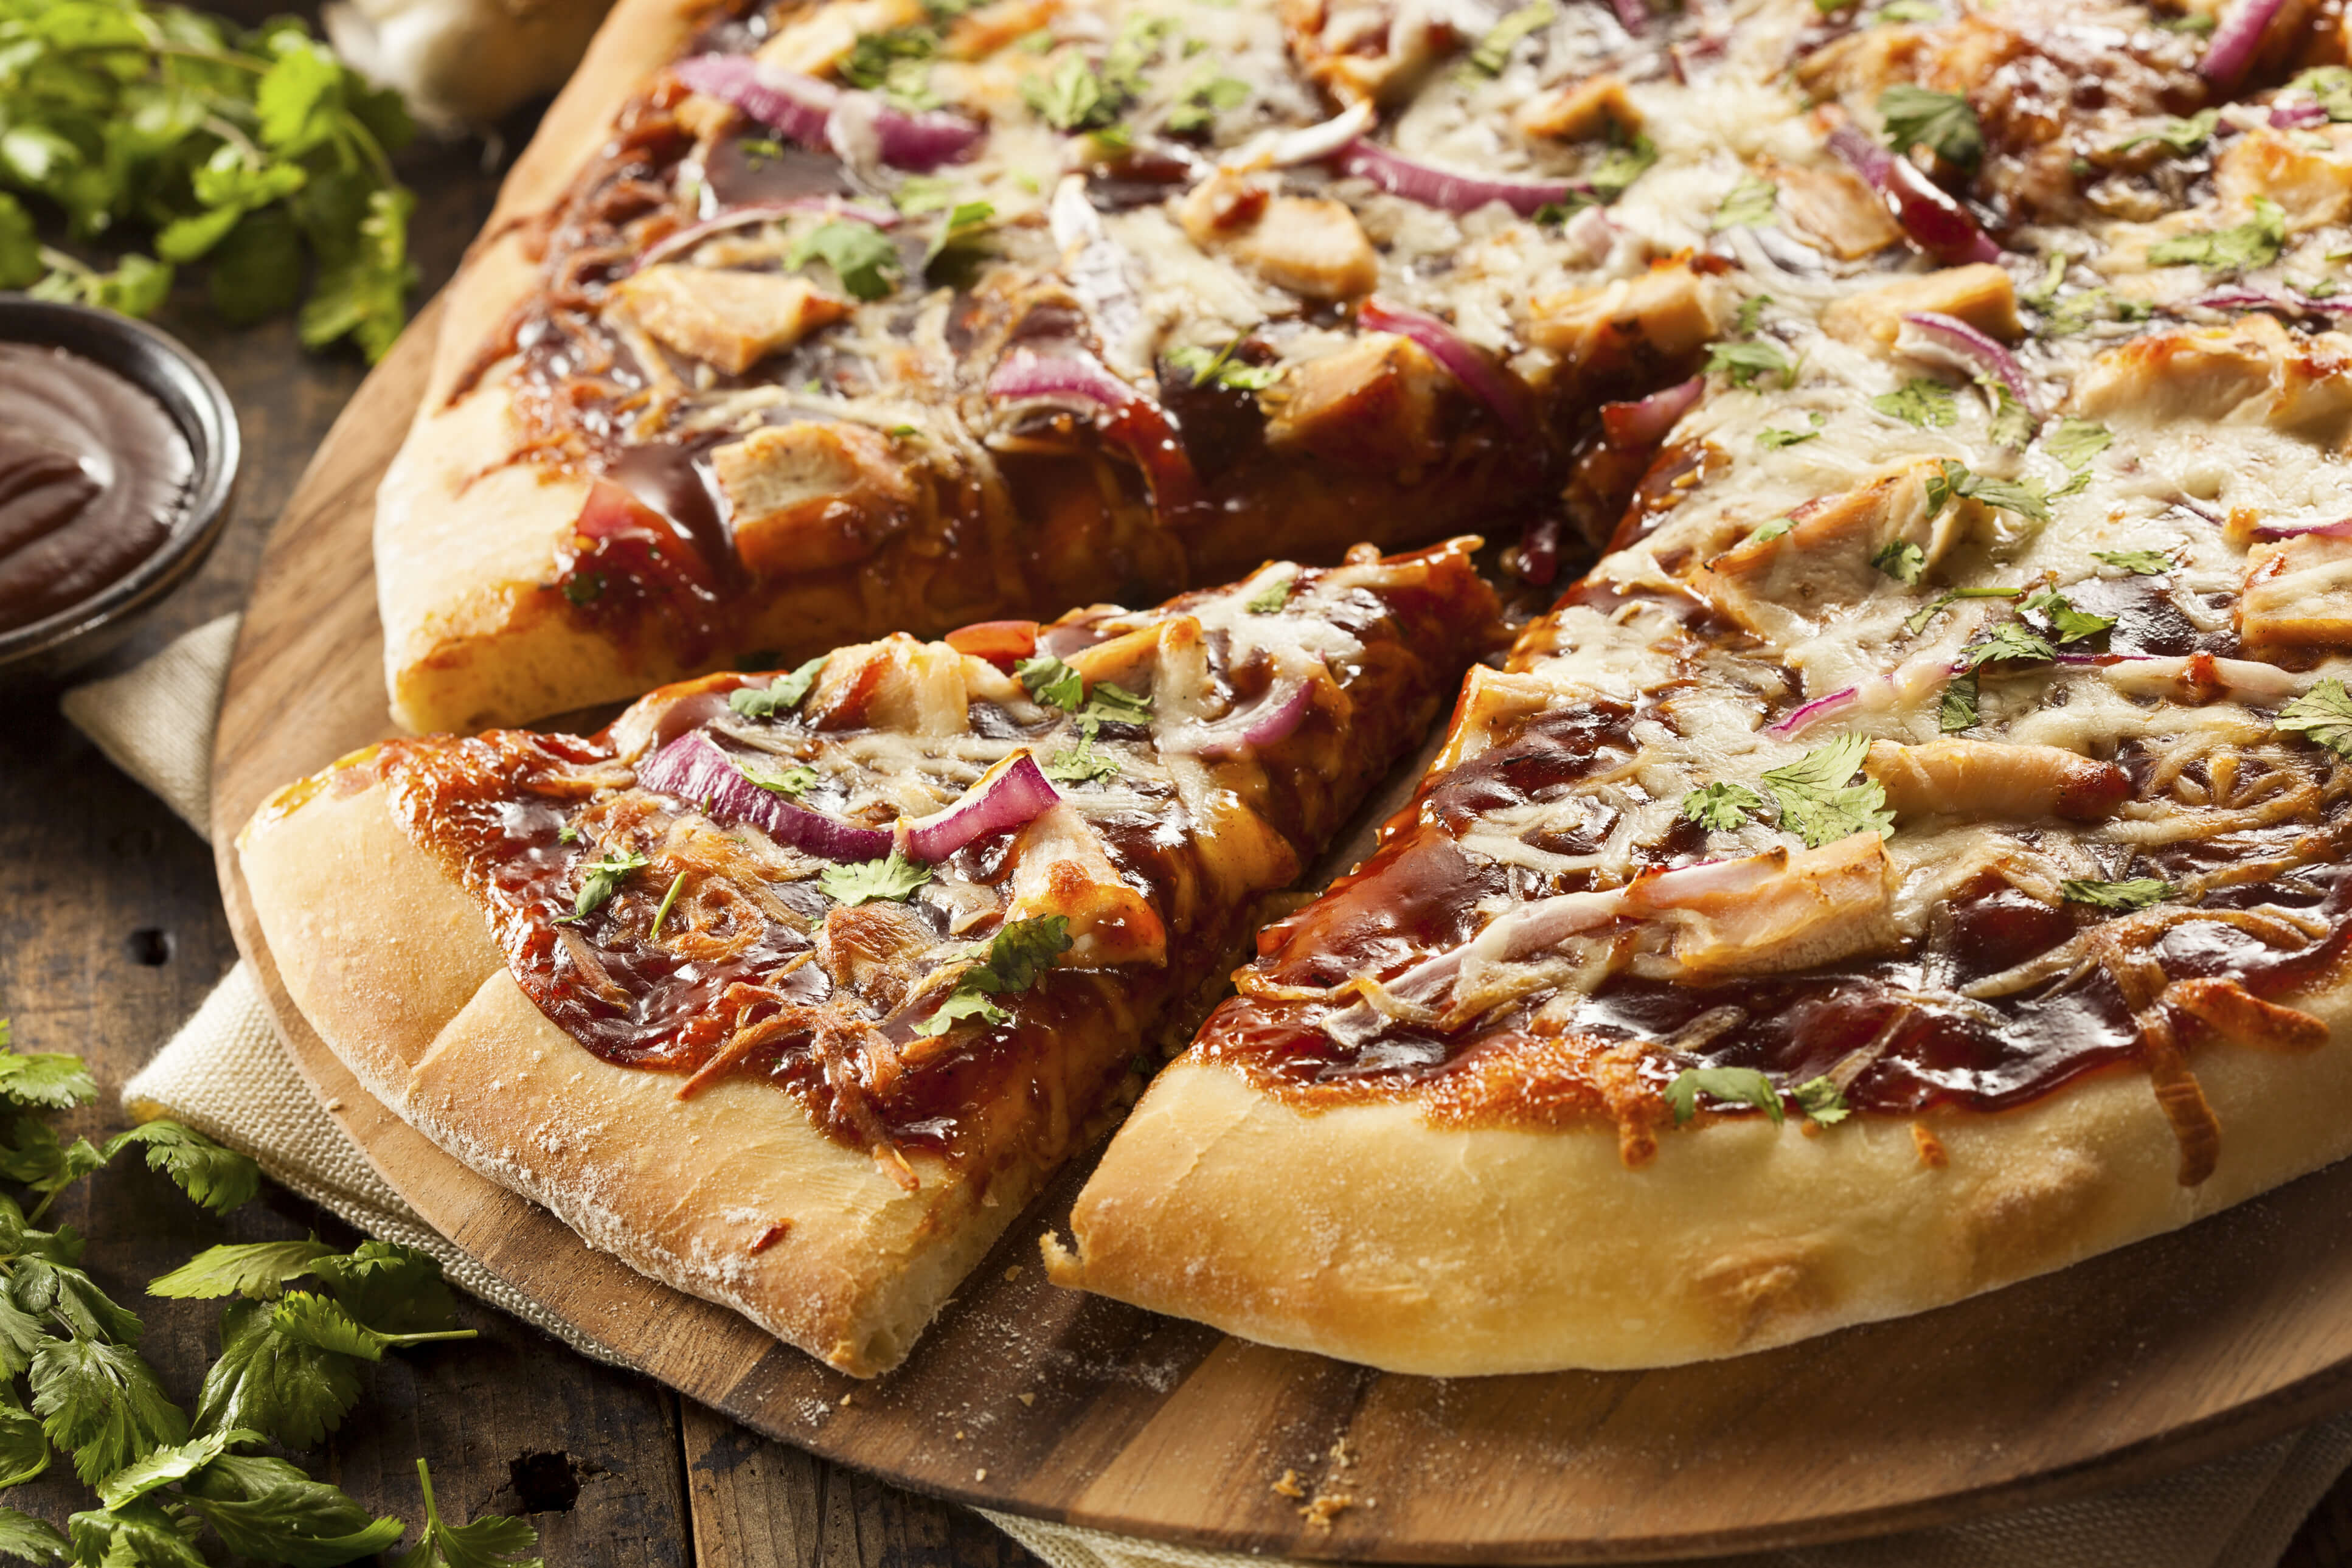 Bacon makes for a great pizza topping.